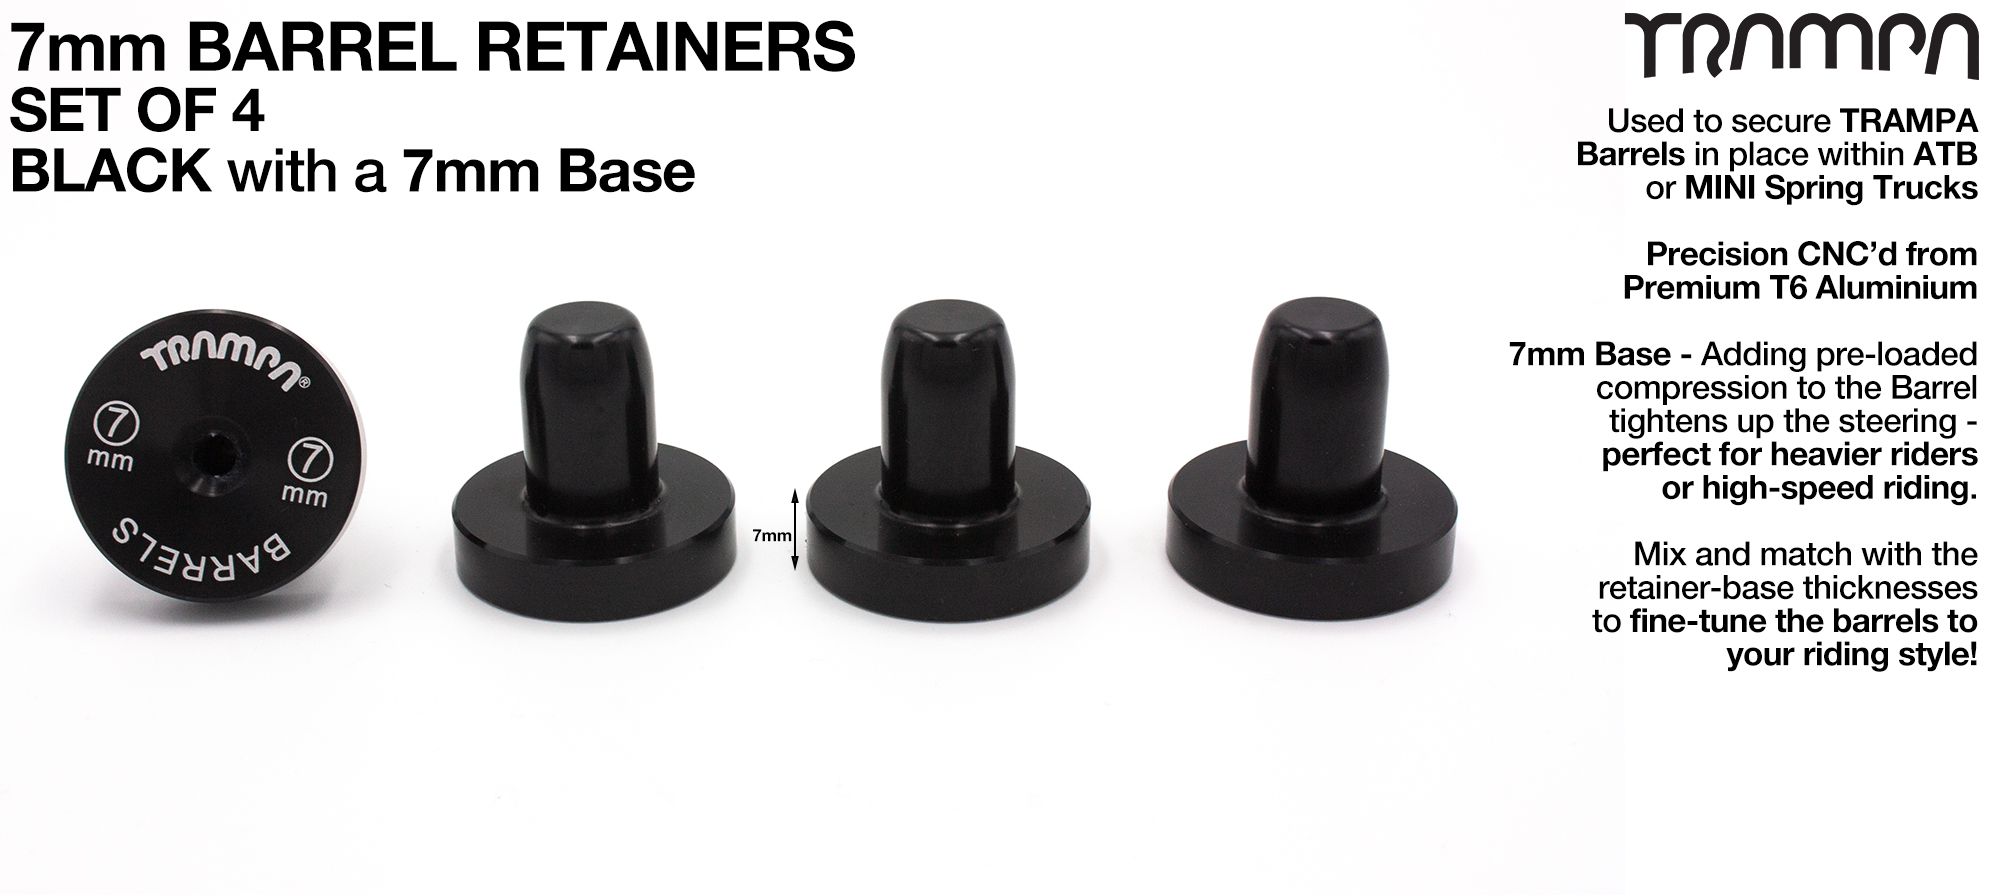 Barrel Retainers x4 with 7mm Base